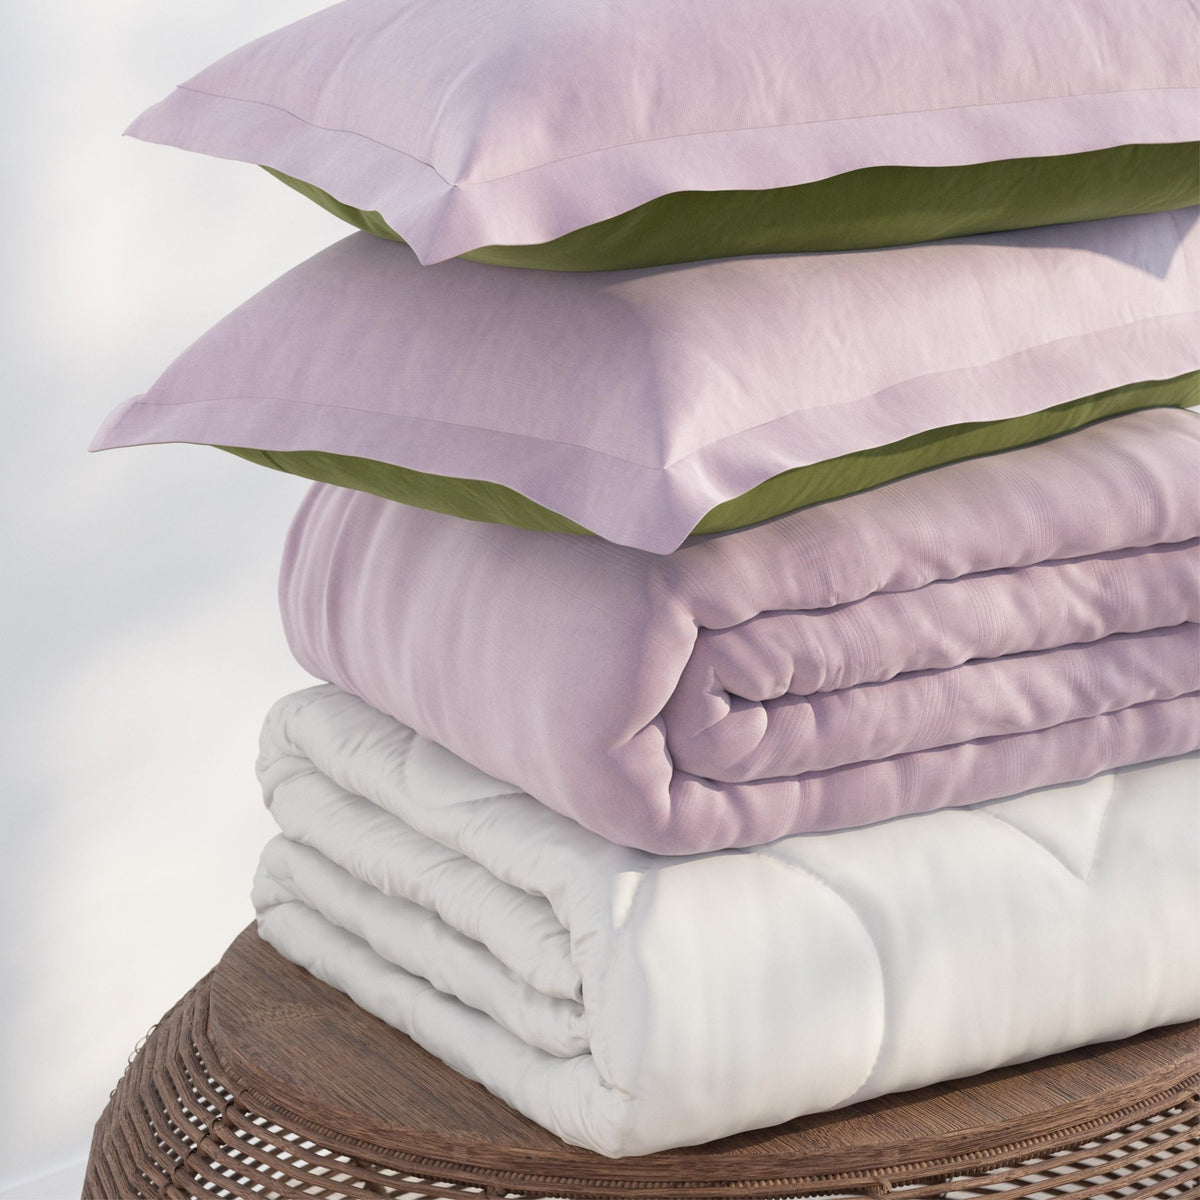 Image of a pile of bedding on top of a brown table. The bedding shown includes (from top to bottom): 2 Lilac/Jungle Pillow Shams with the Lilac side facing up, a neatly folded Lilac/Jungle Duvet Cover + Cooling with the lilac side showing, and a neatly folded Cooling Duvet Insert 